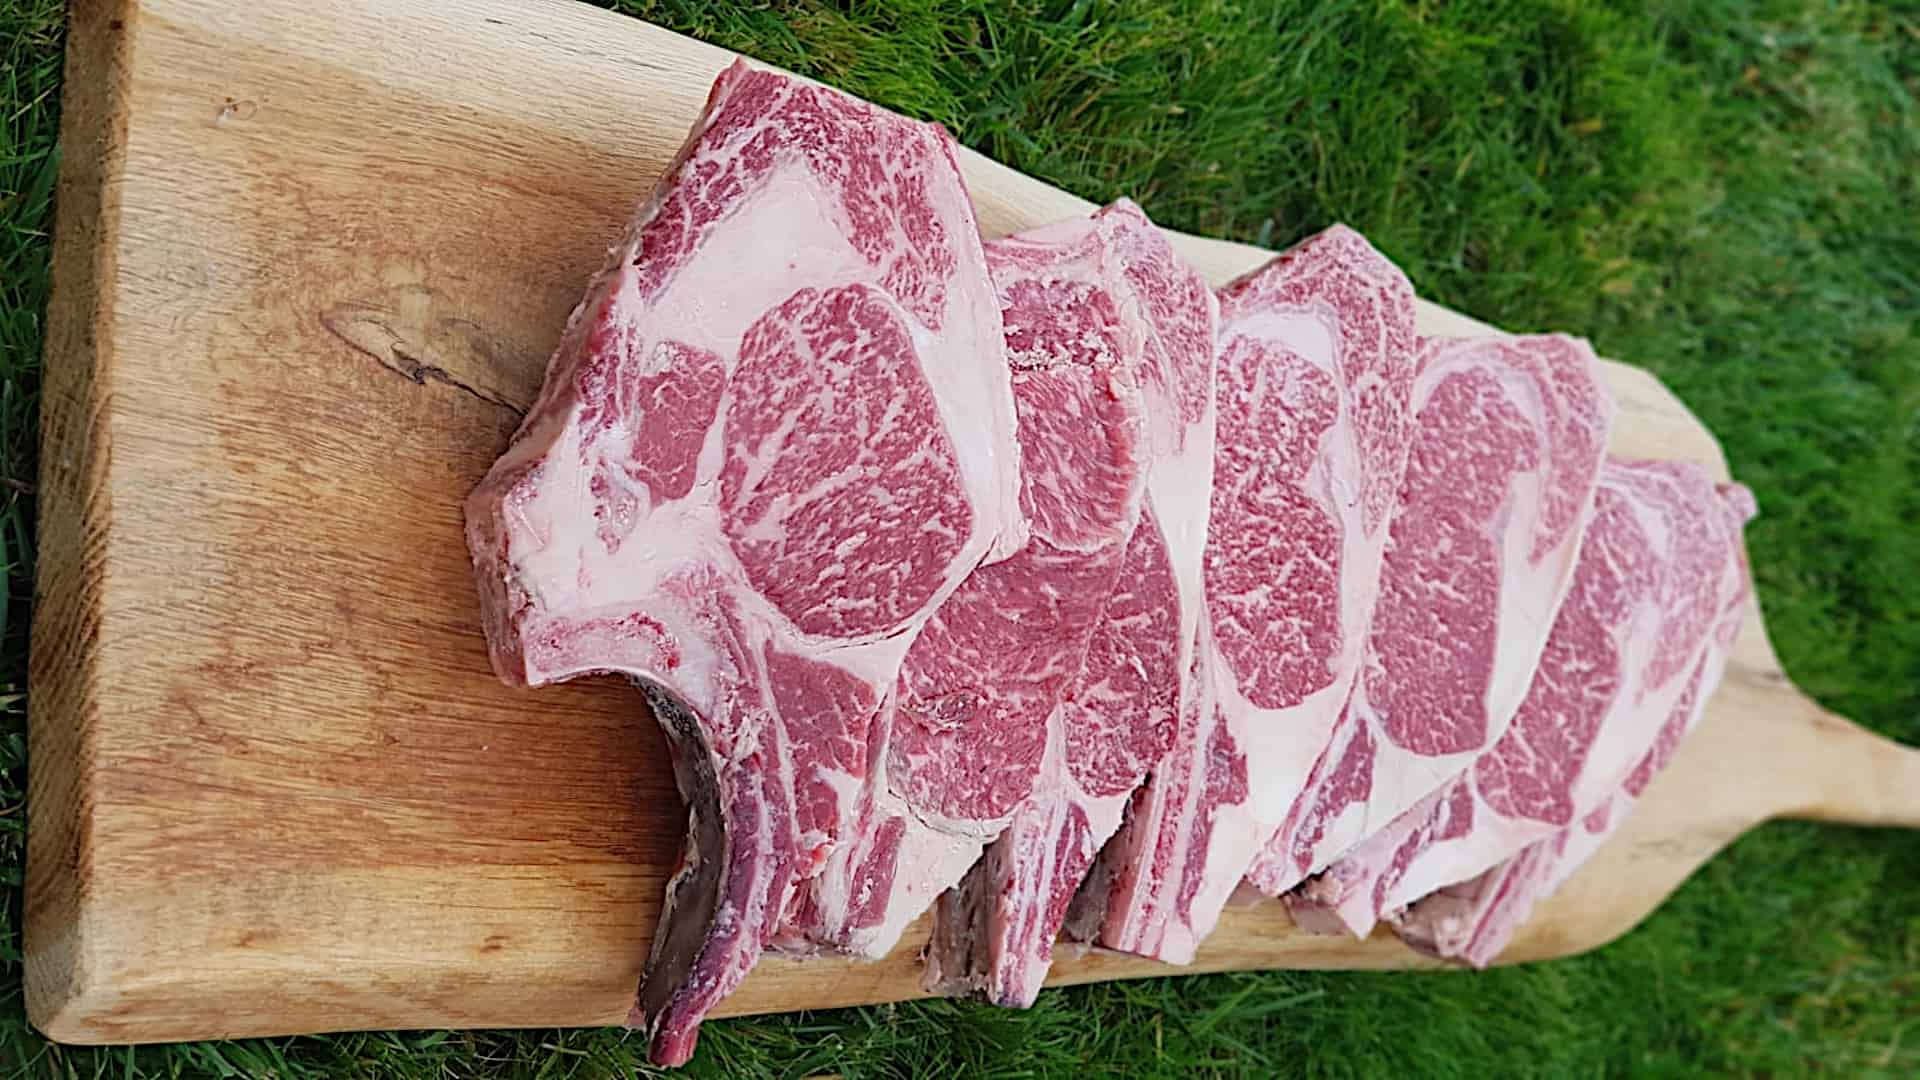 Marbled meat